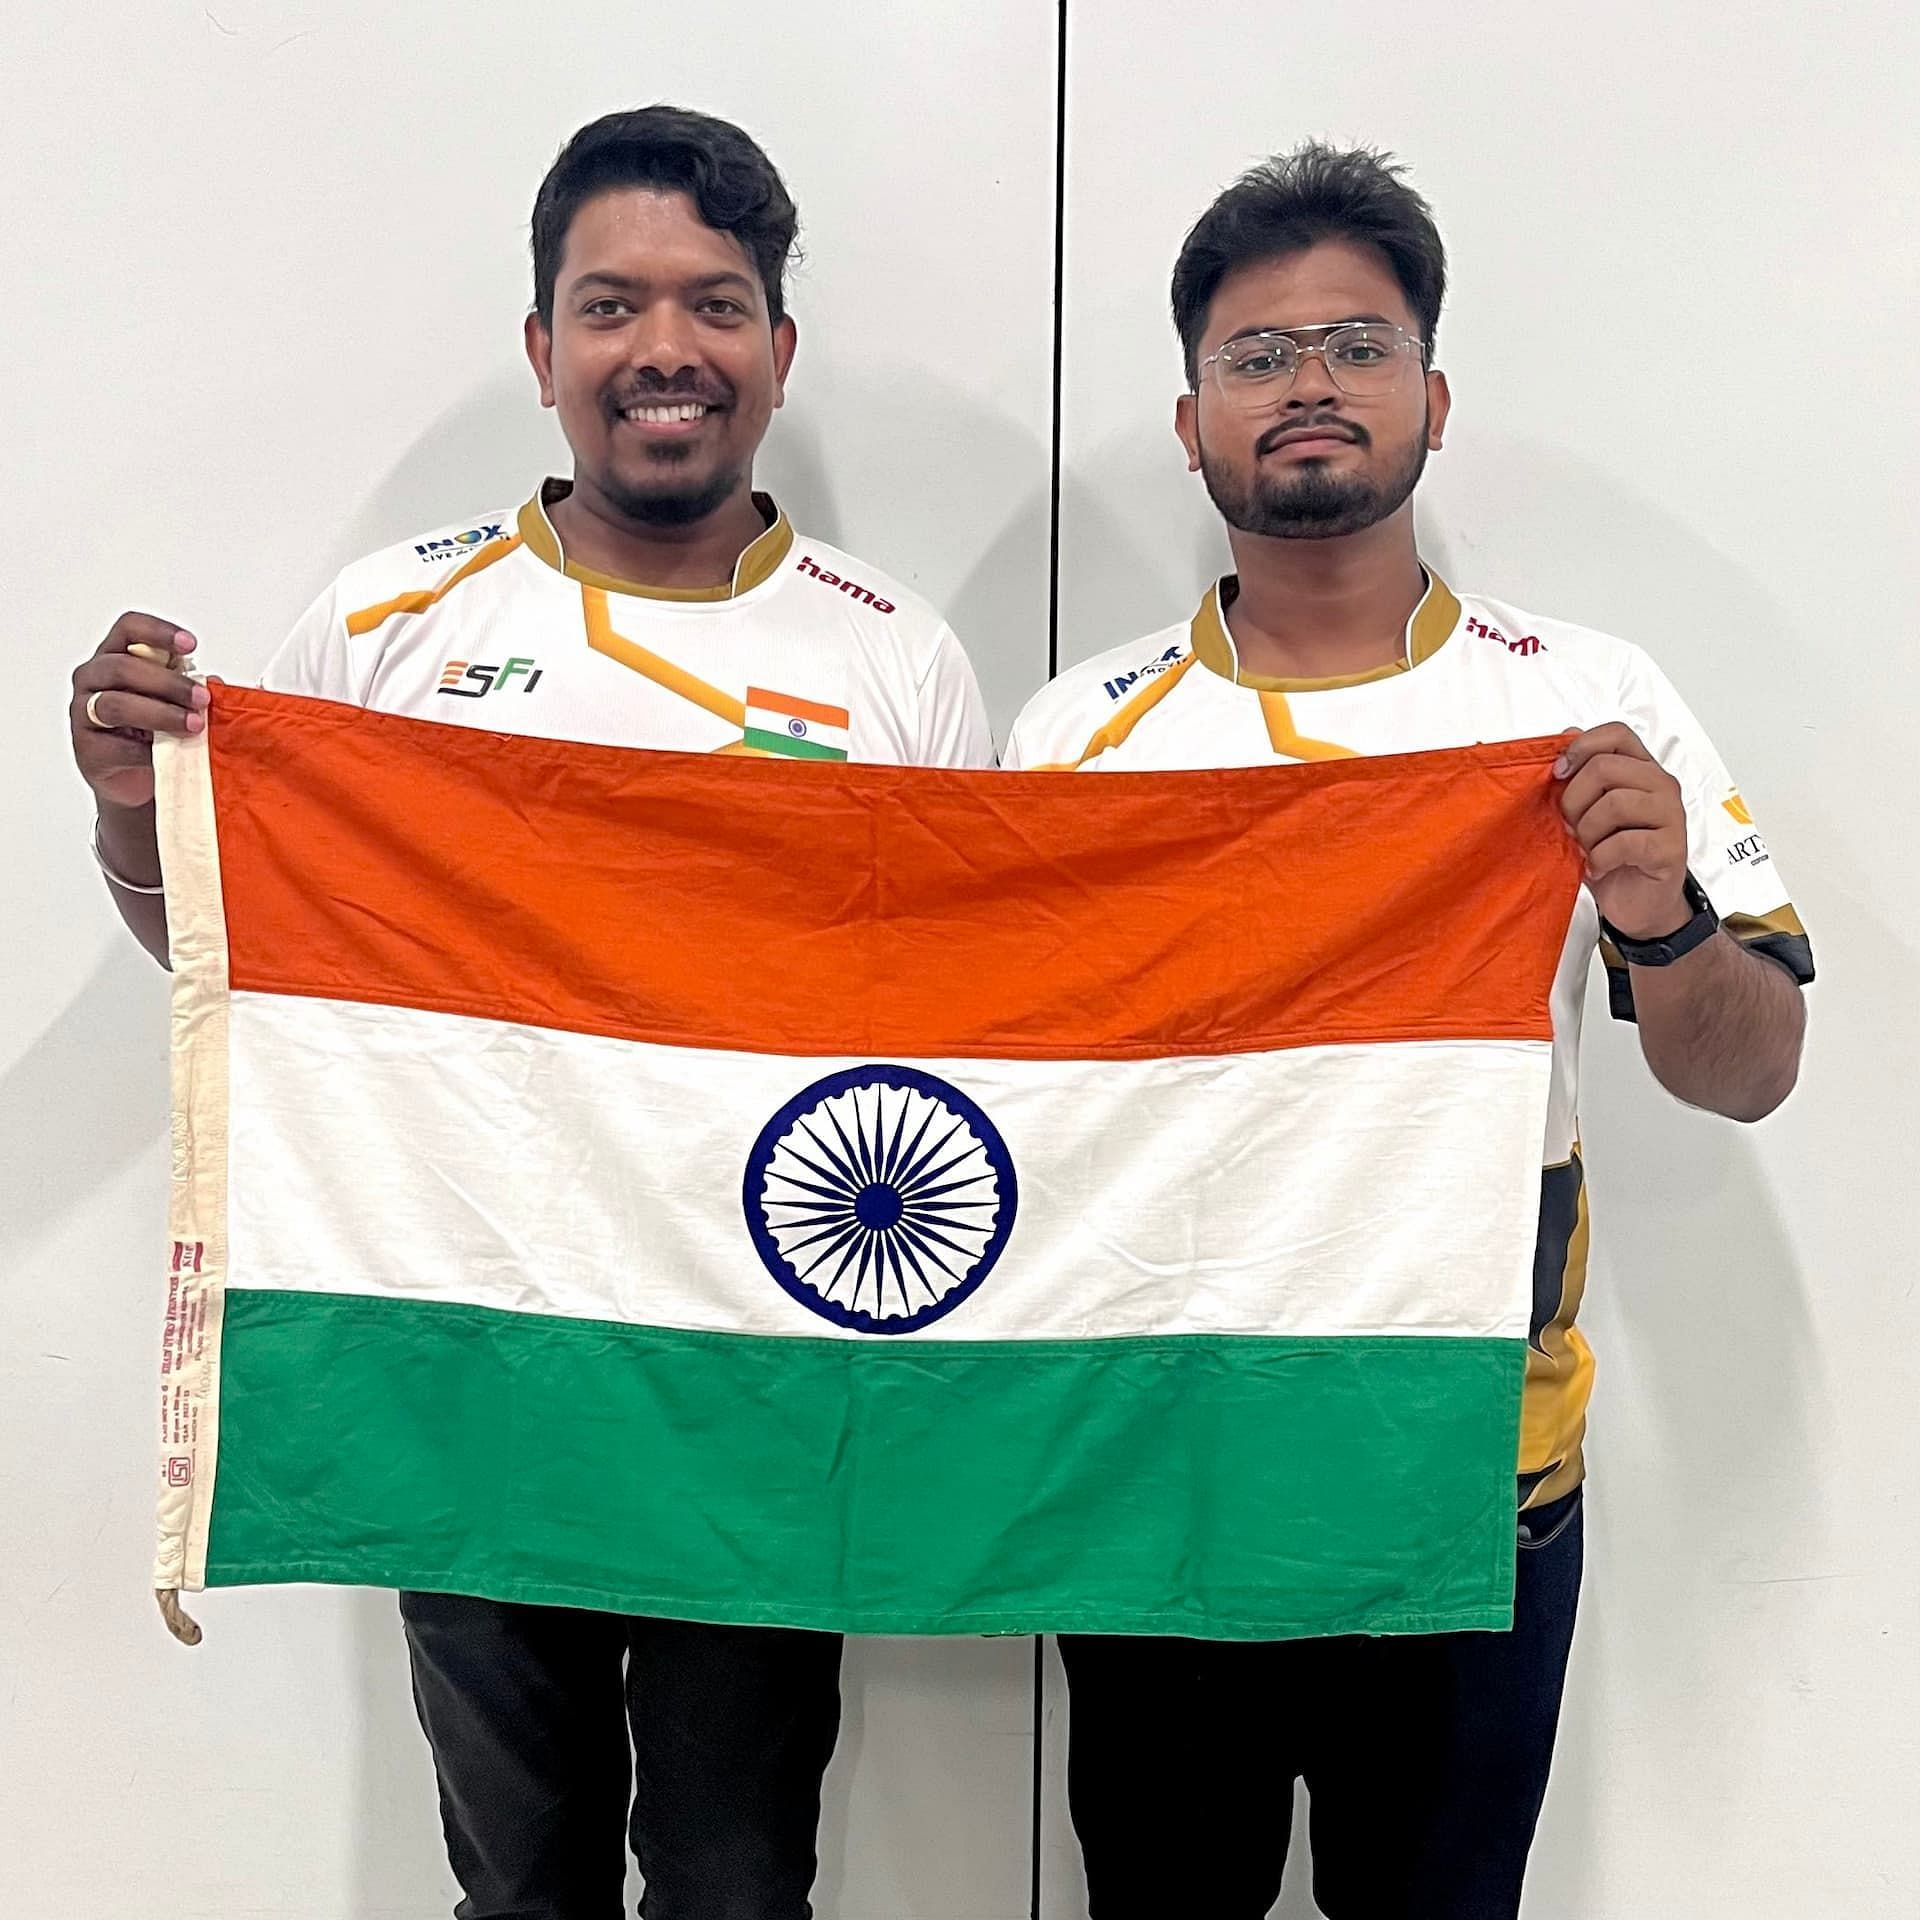 Asian Games 2023 FC Online: Indian esports players, results and scores